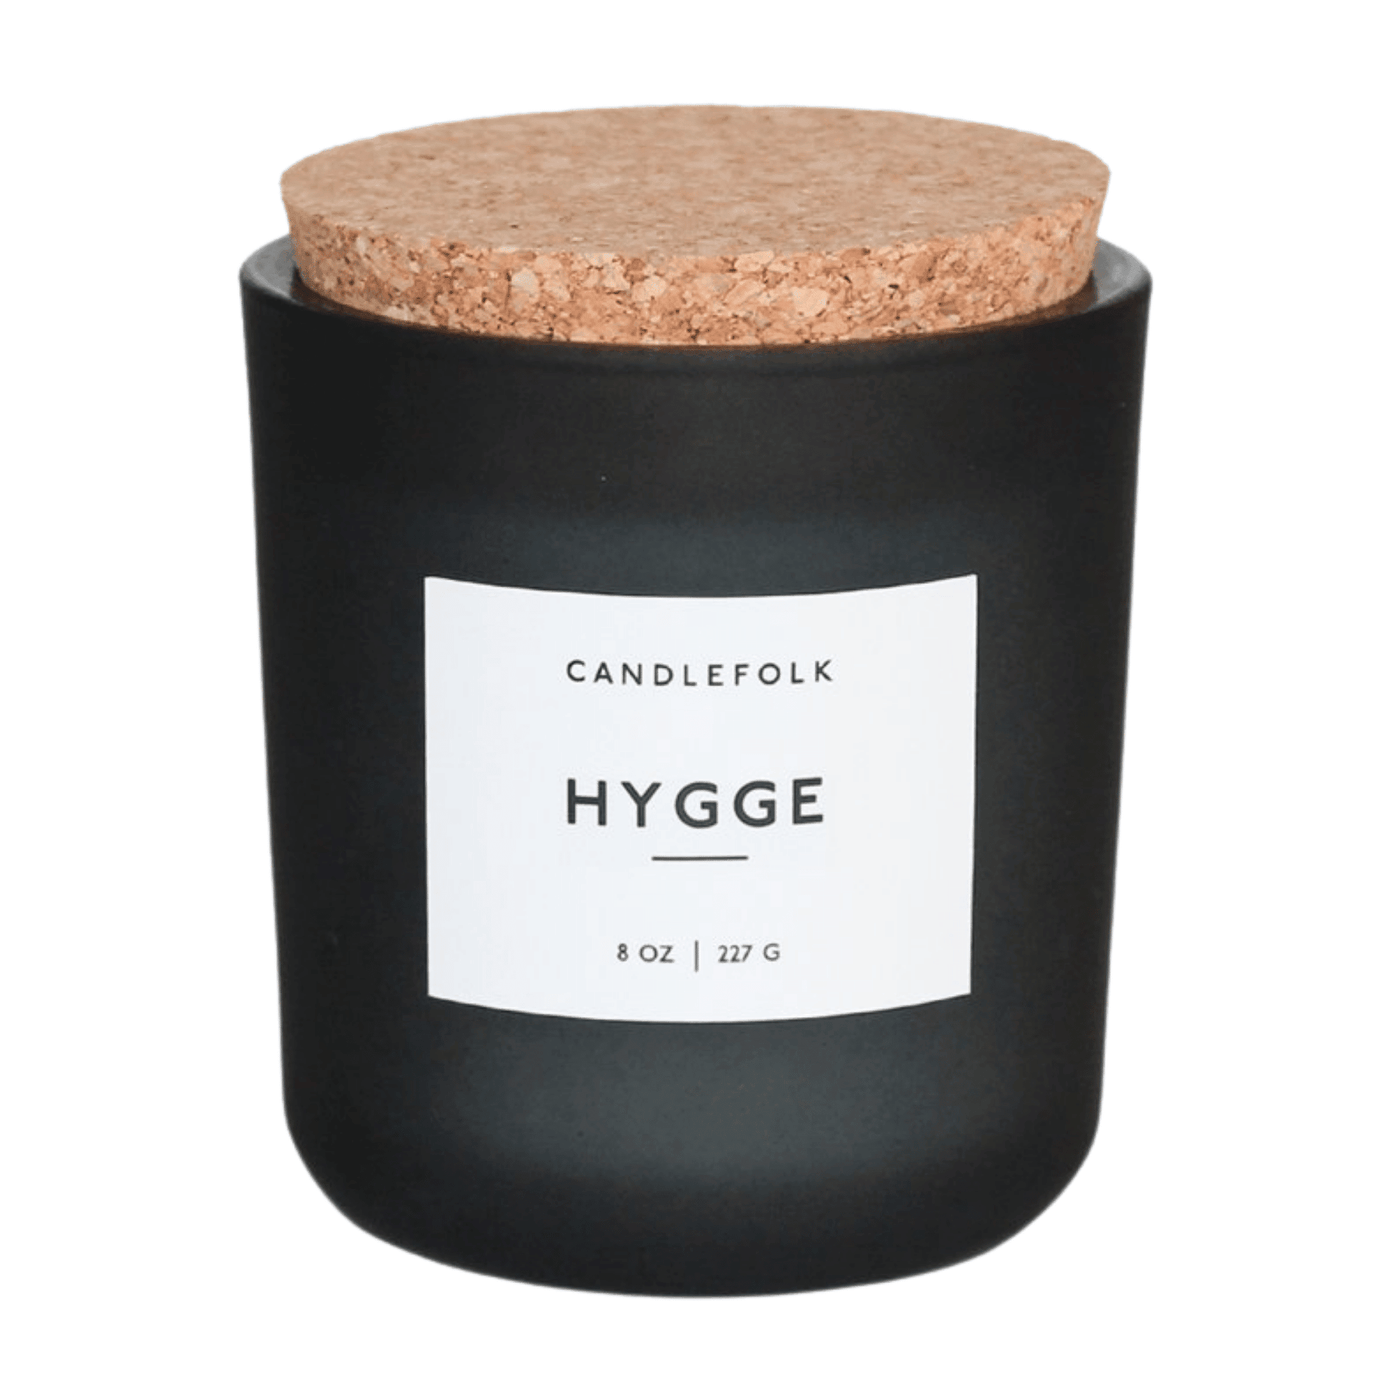 Candle Oil Fragrances - Hygge Candlefolk |  Exquis Parfume Montreal